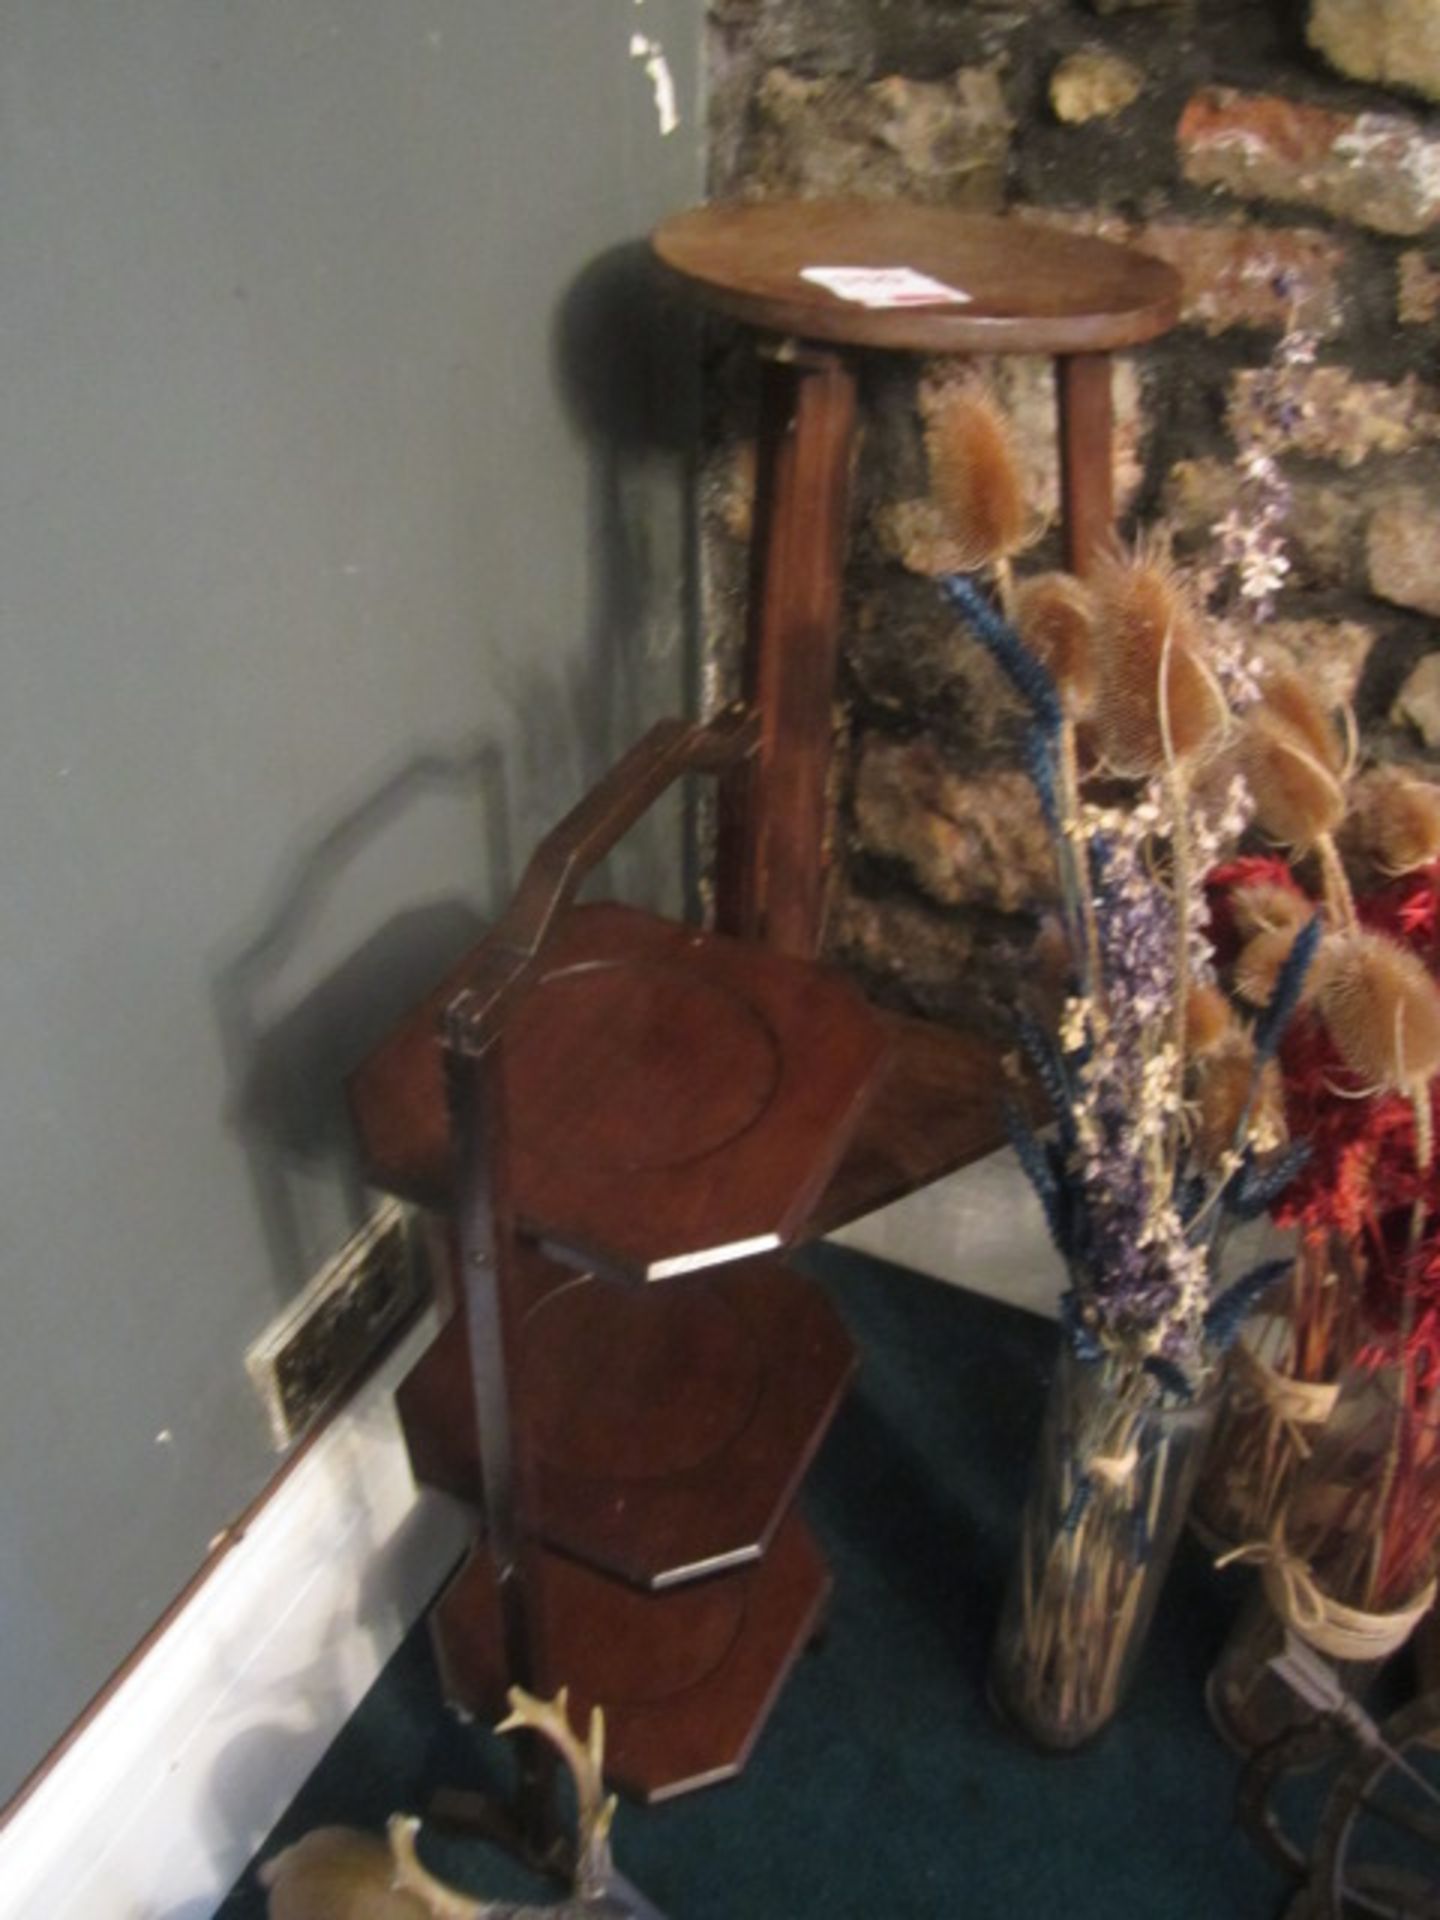 2 x ornate display stands, 3 x vases, 5 x ornaments, candle lantern, waste bin - Image 2 of 5